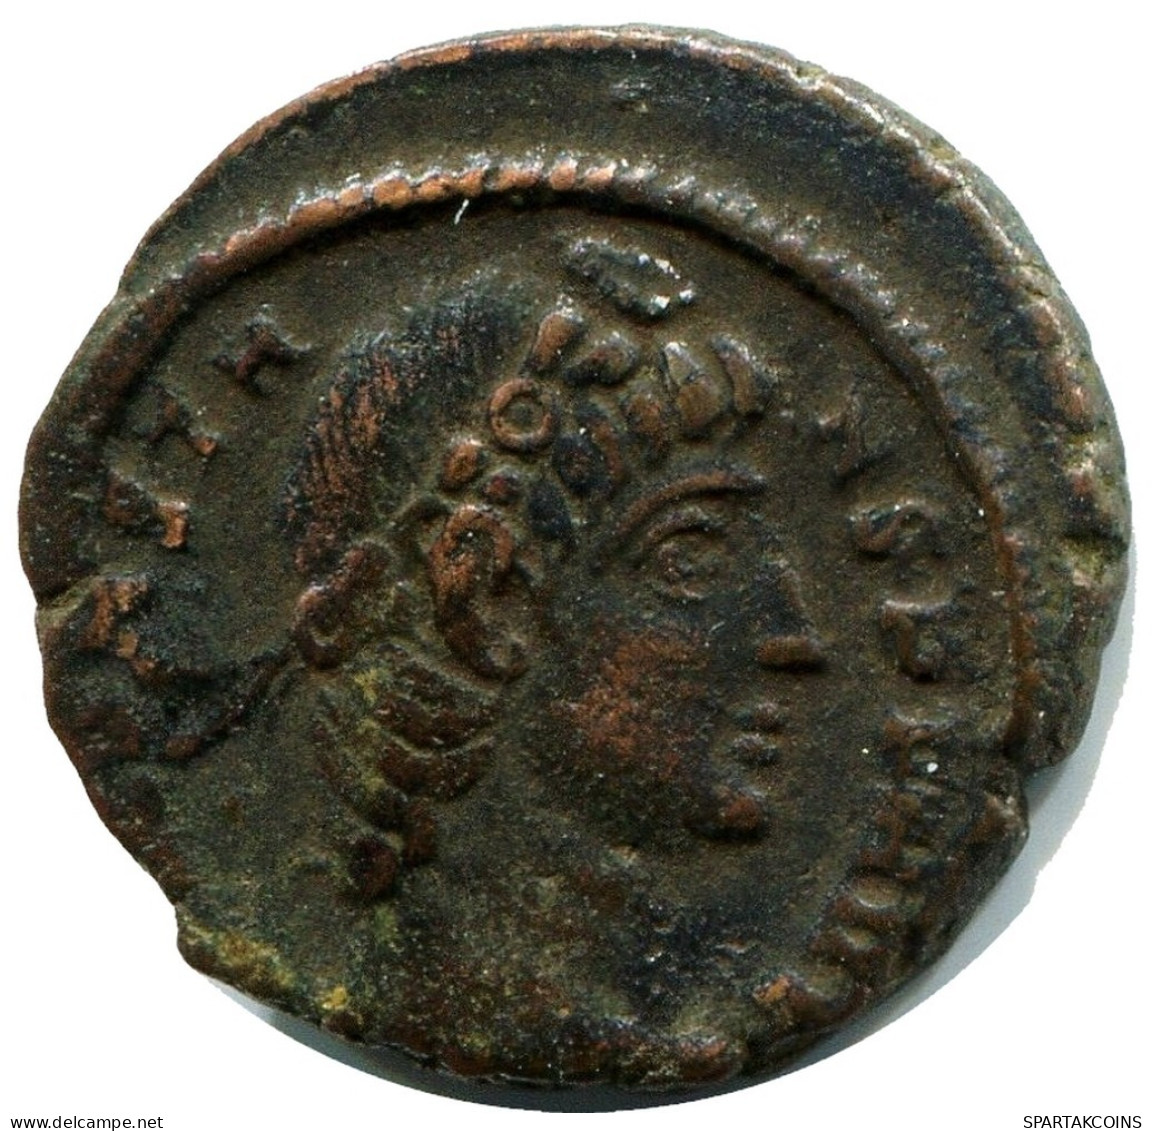 CONSTANS MINTED IN ANTIOCH FOUND IN IHNASYAH HOARD EGYPT #ANC11796.14.U.A - El Imperio Christiano (307 / 363)